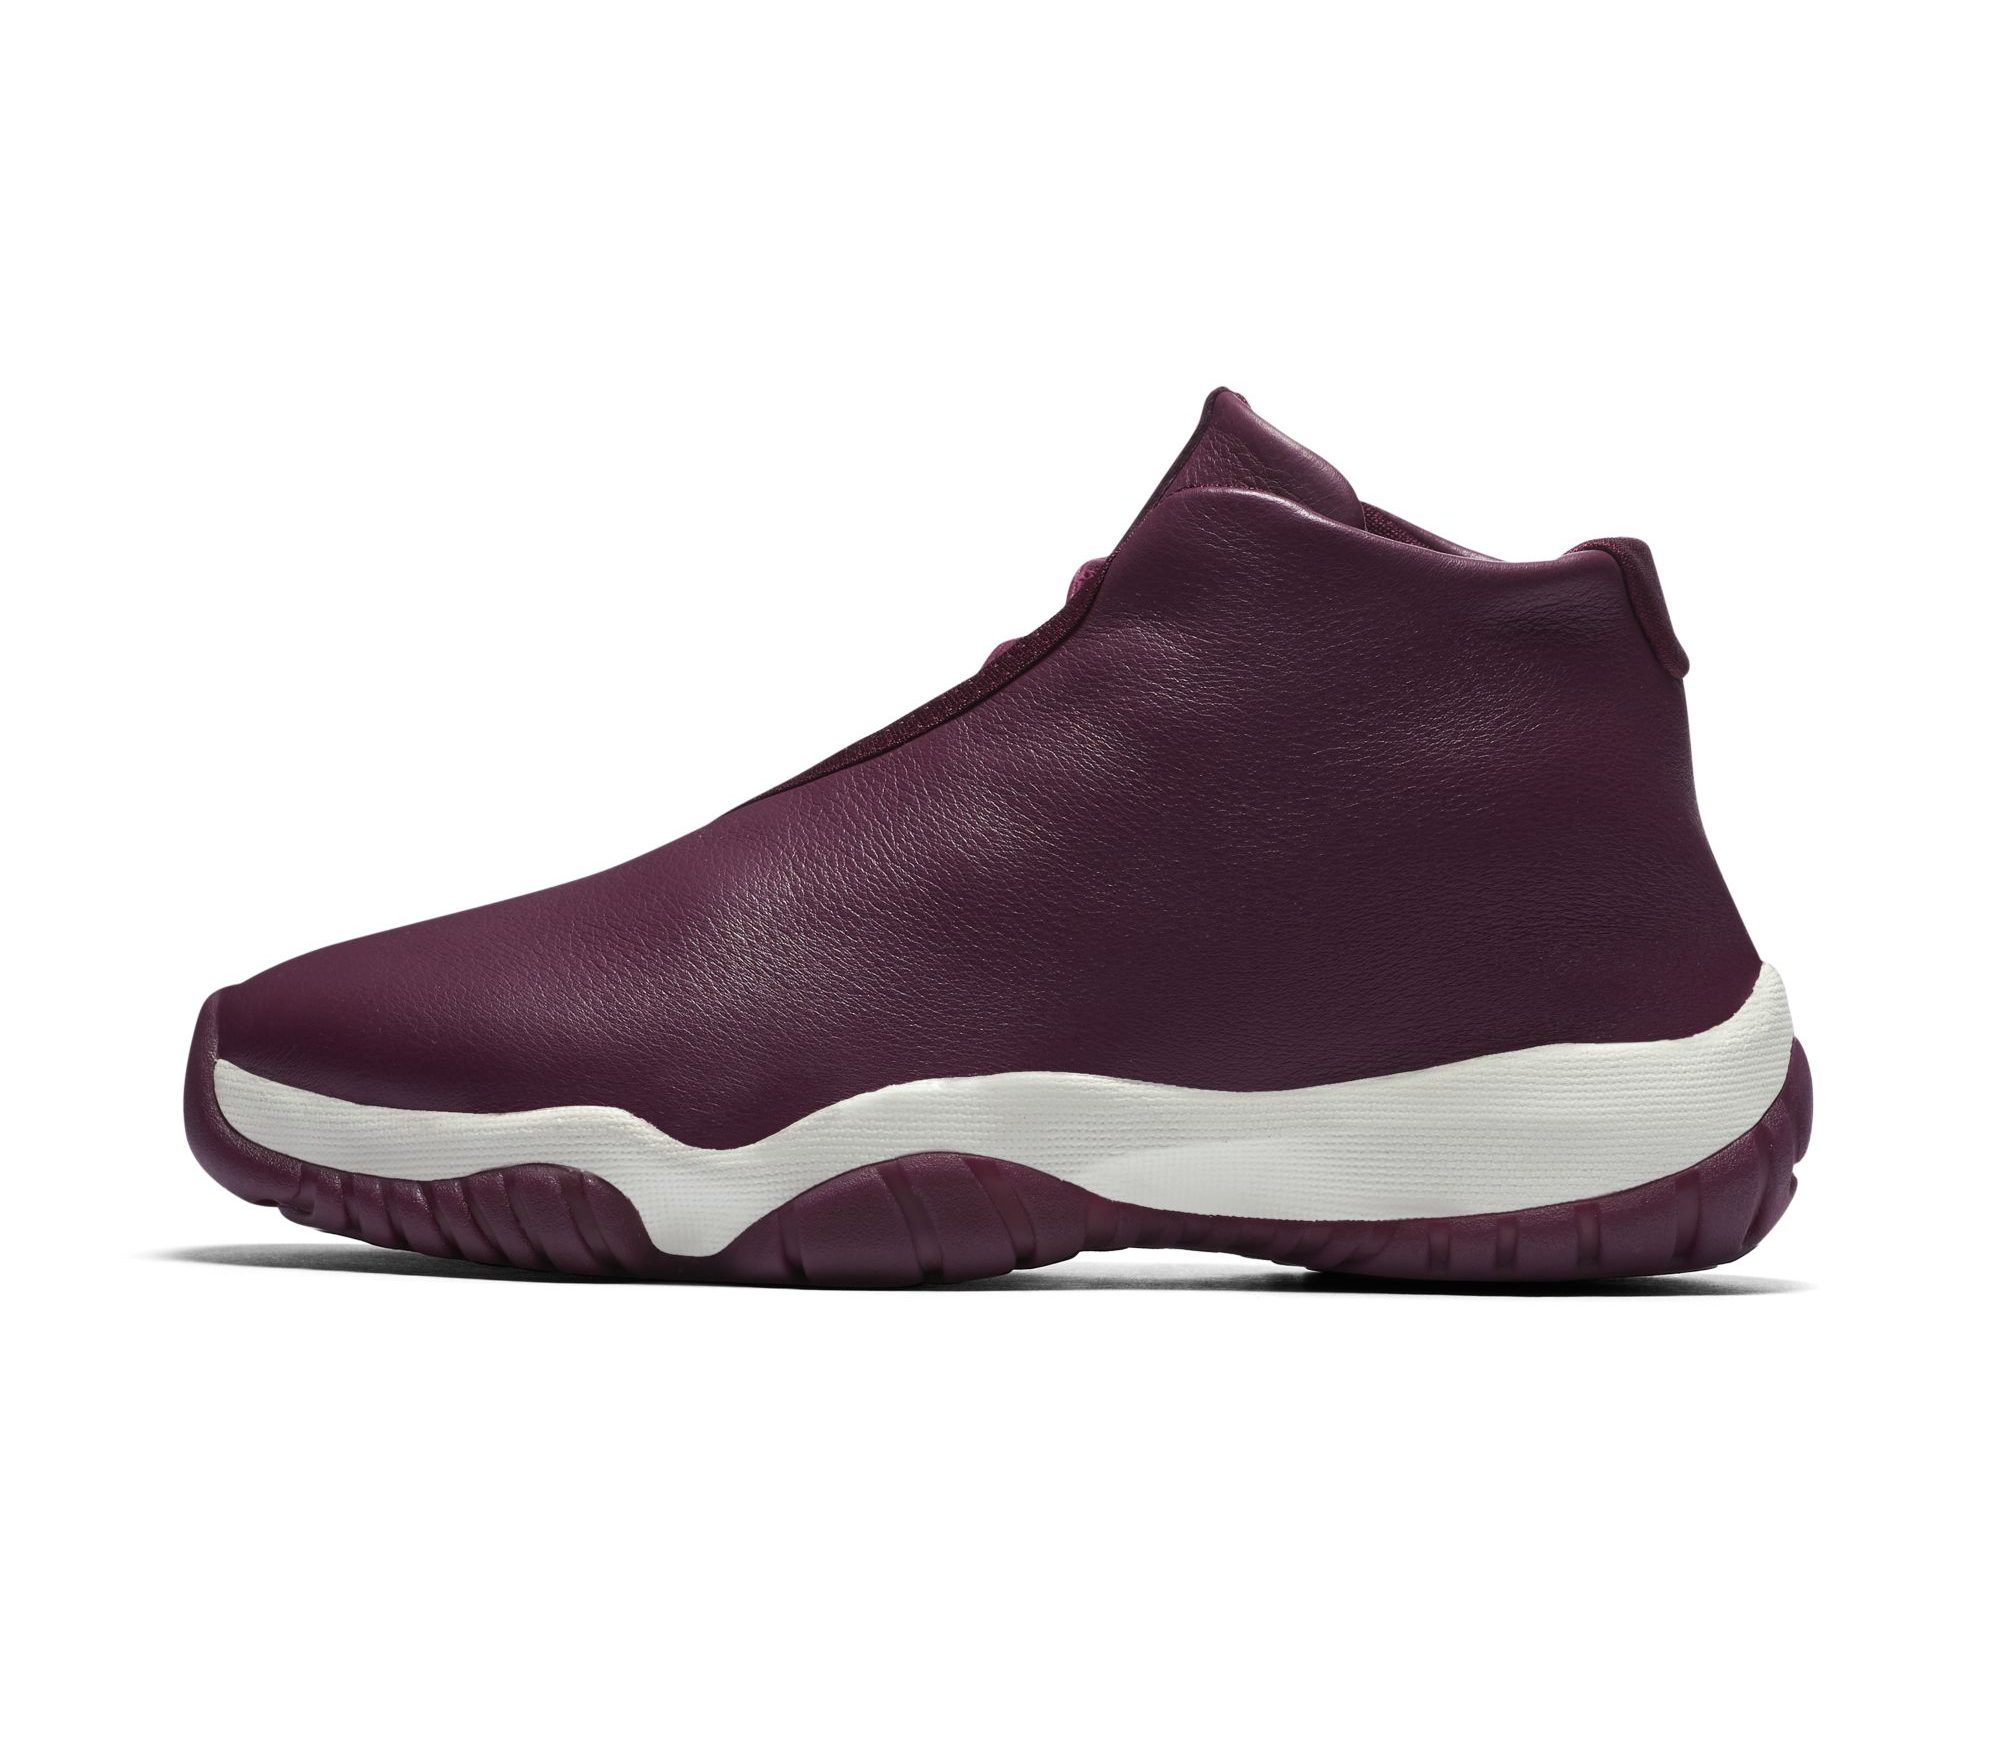 Air Jordan Future to Arrive in Leather 